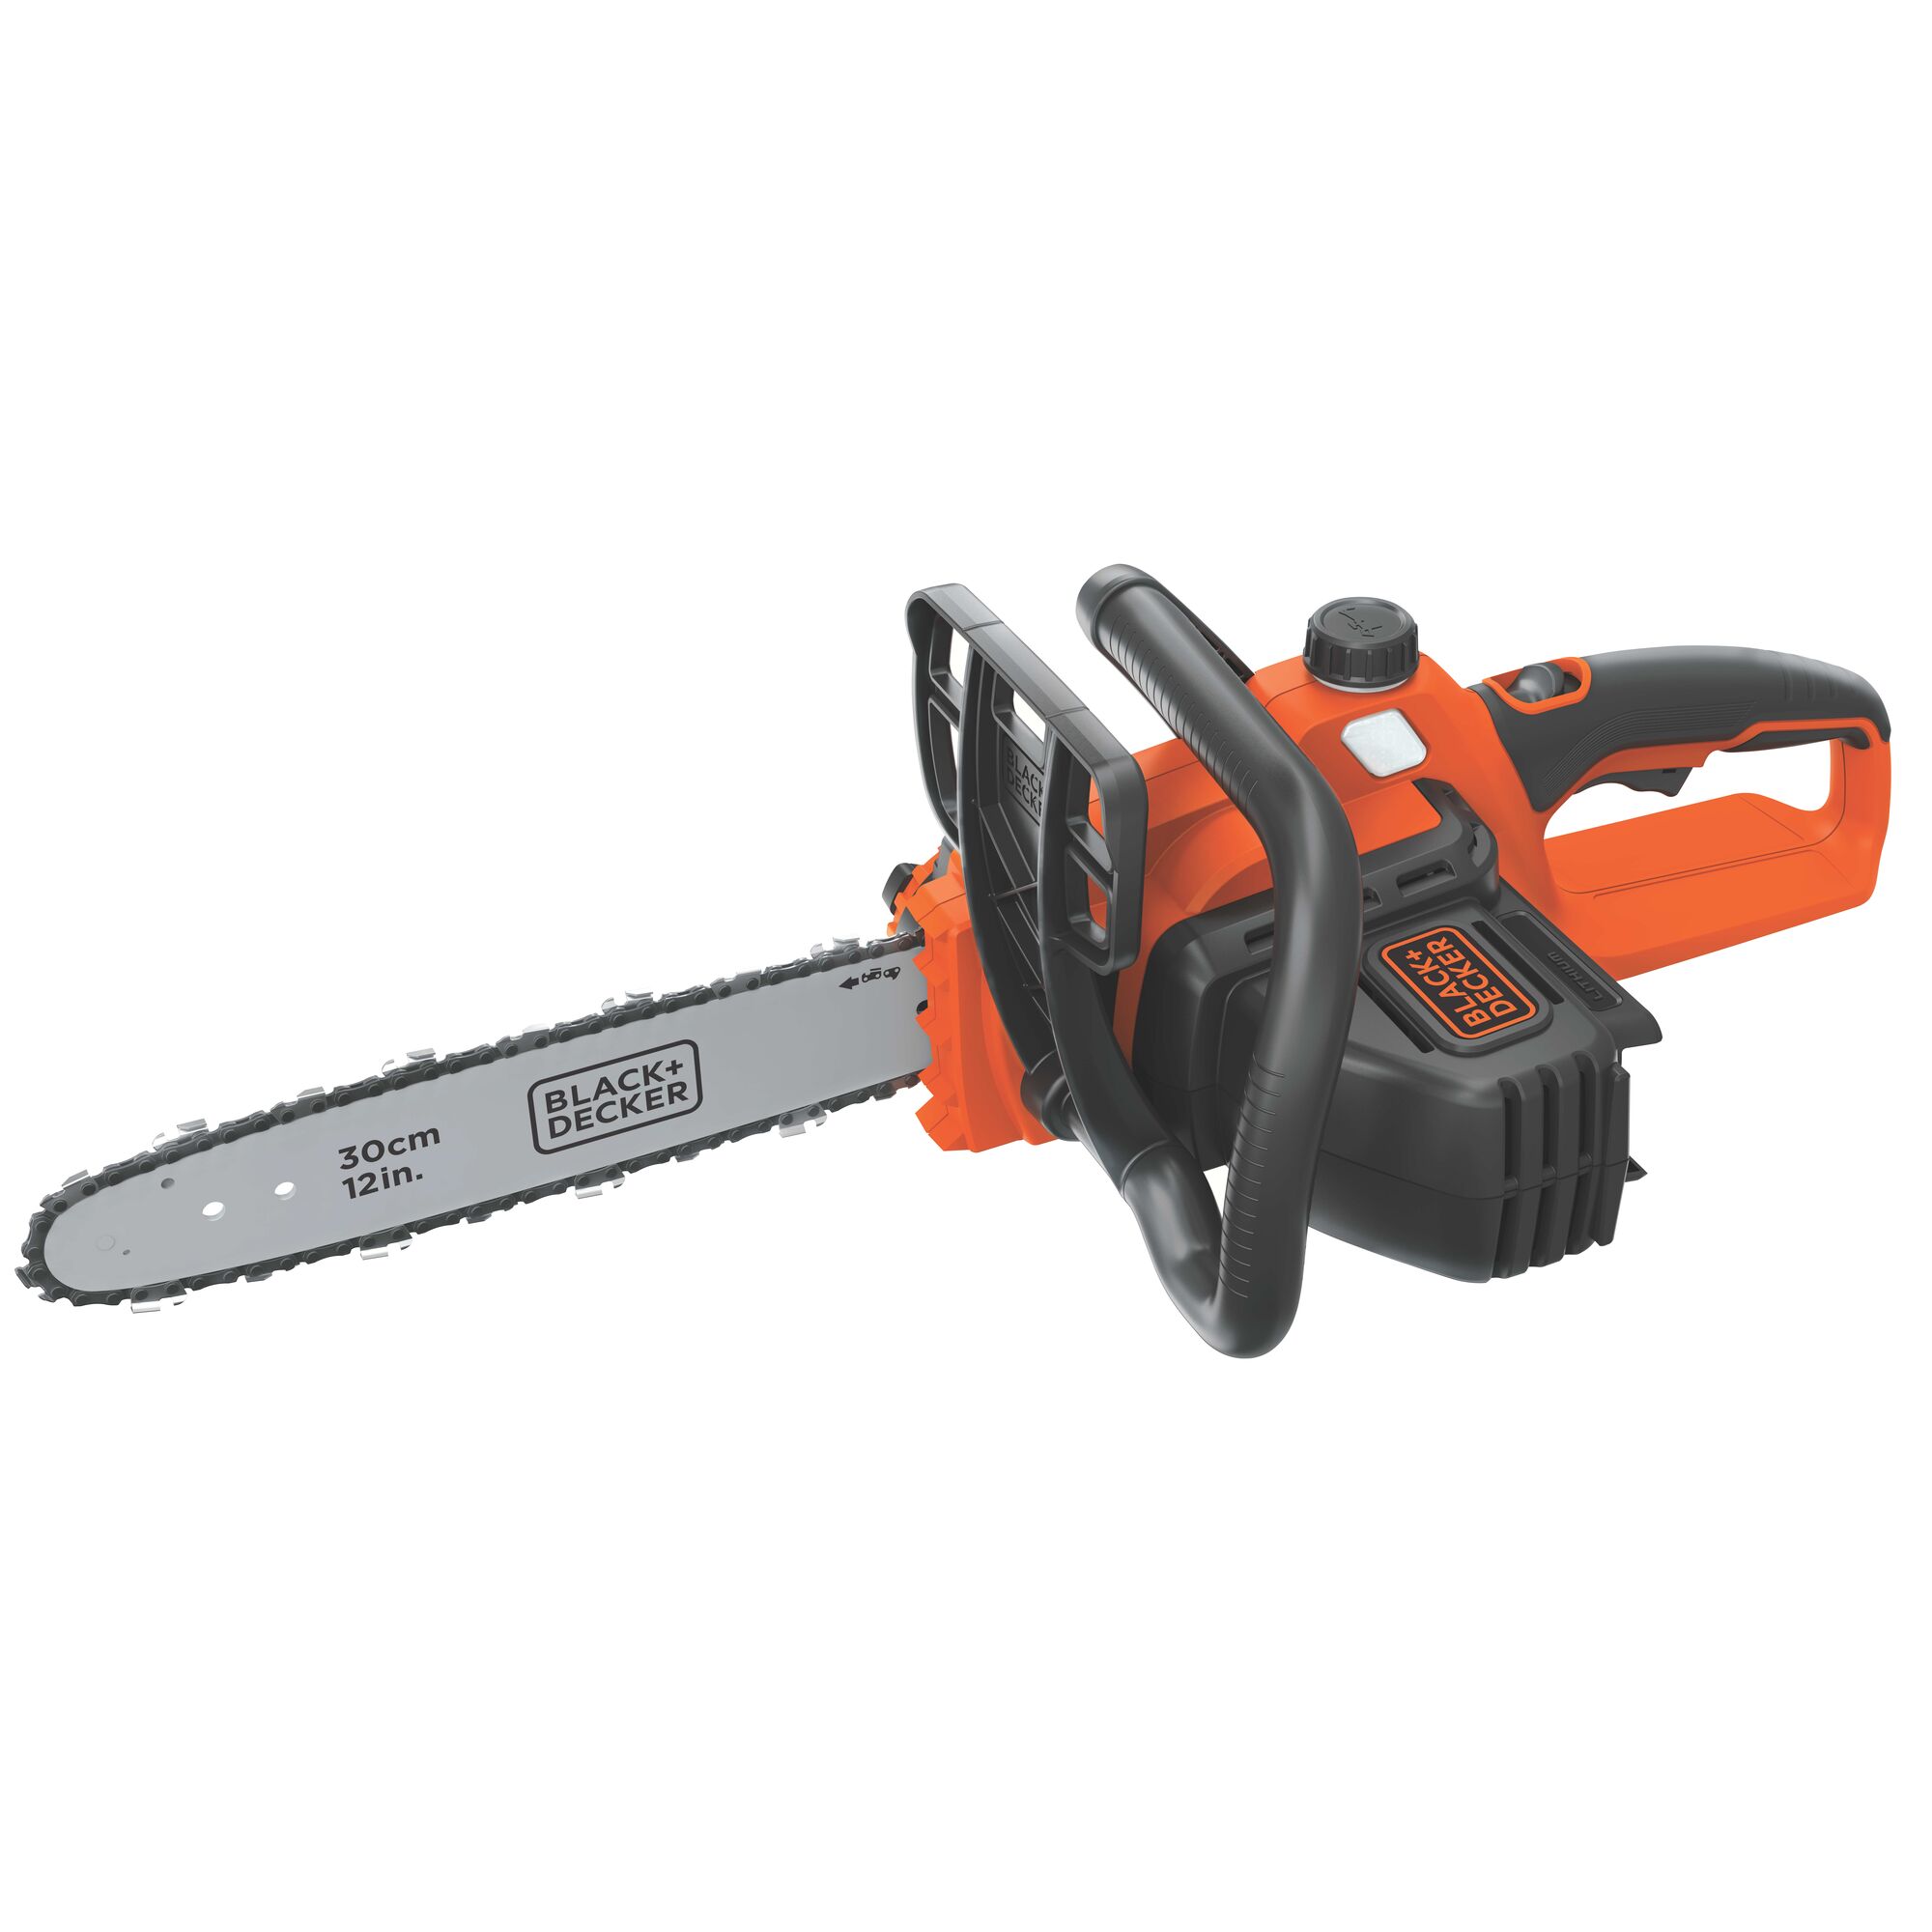 Profile of 40 volt max lithium 12 inch chainsaw battery and charger not included.